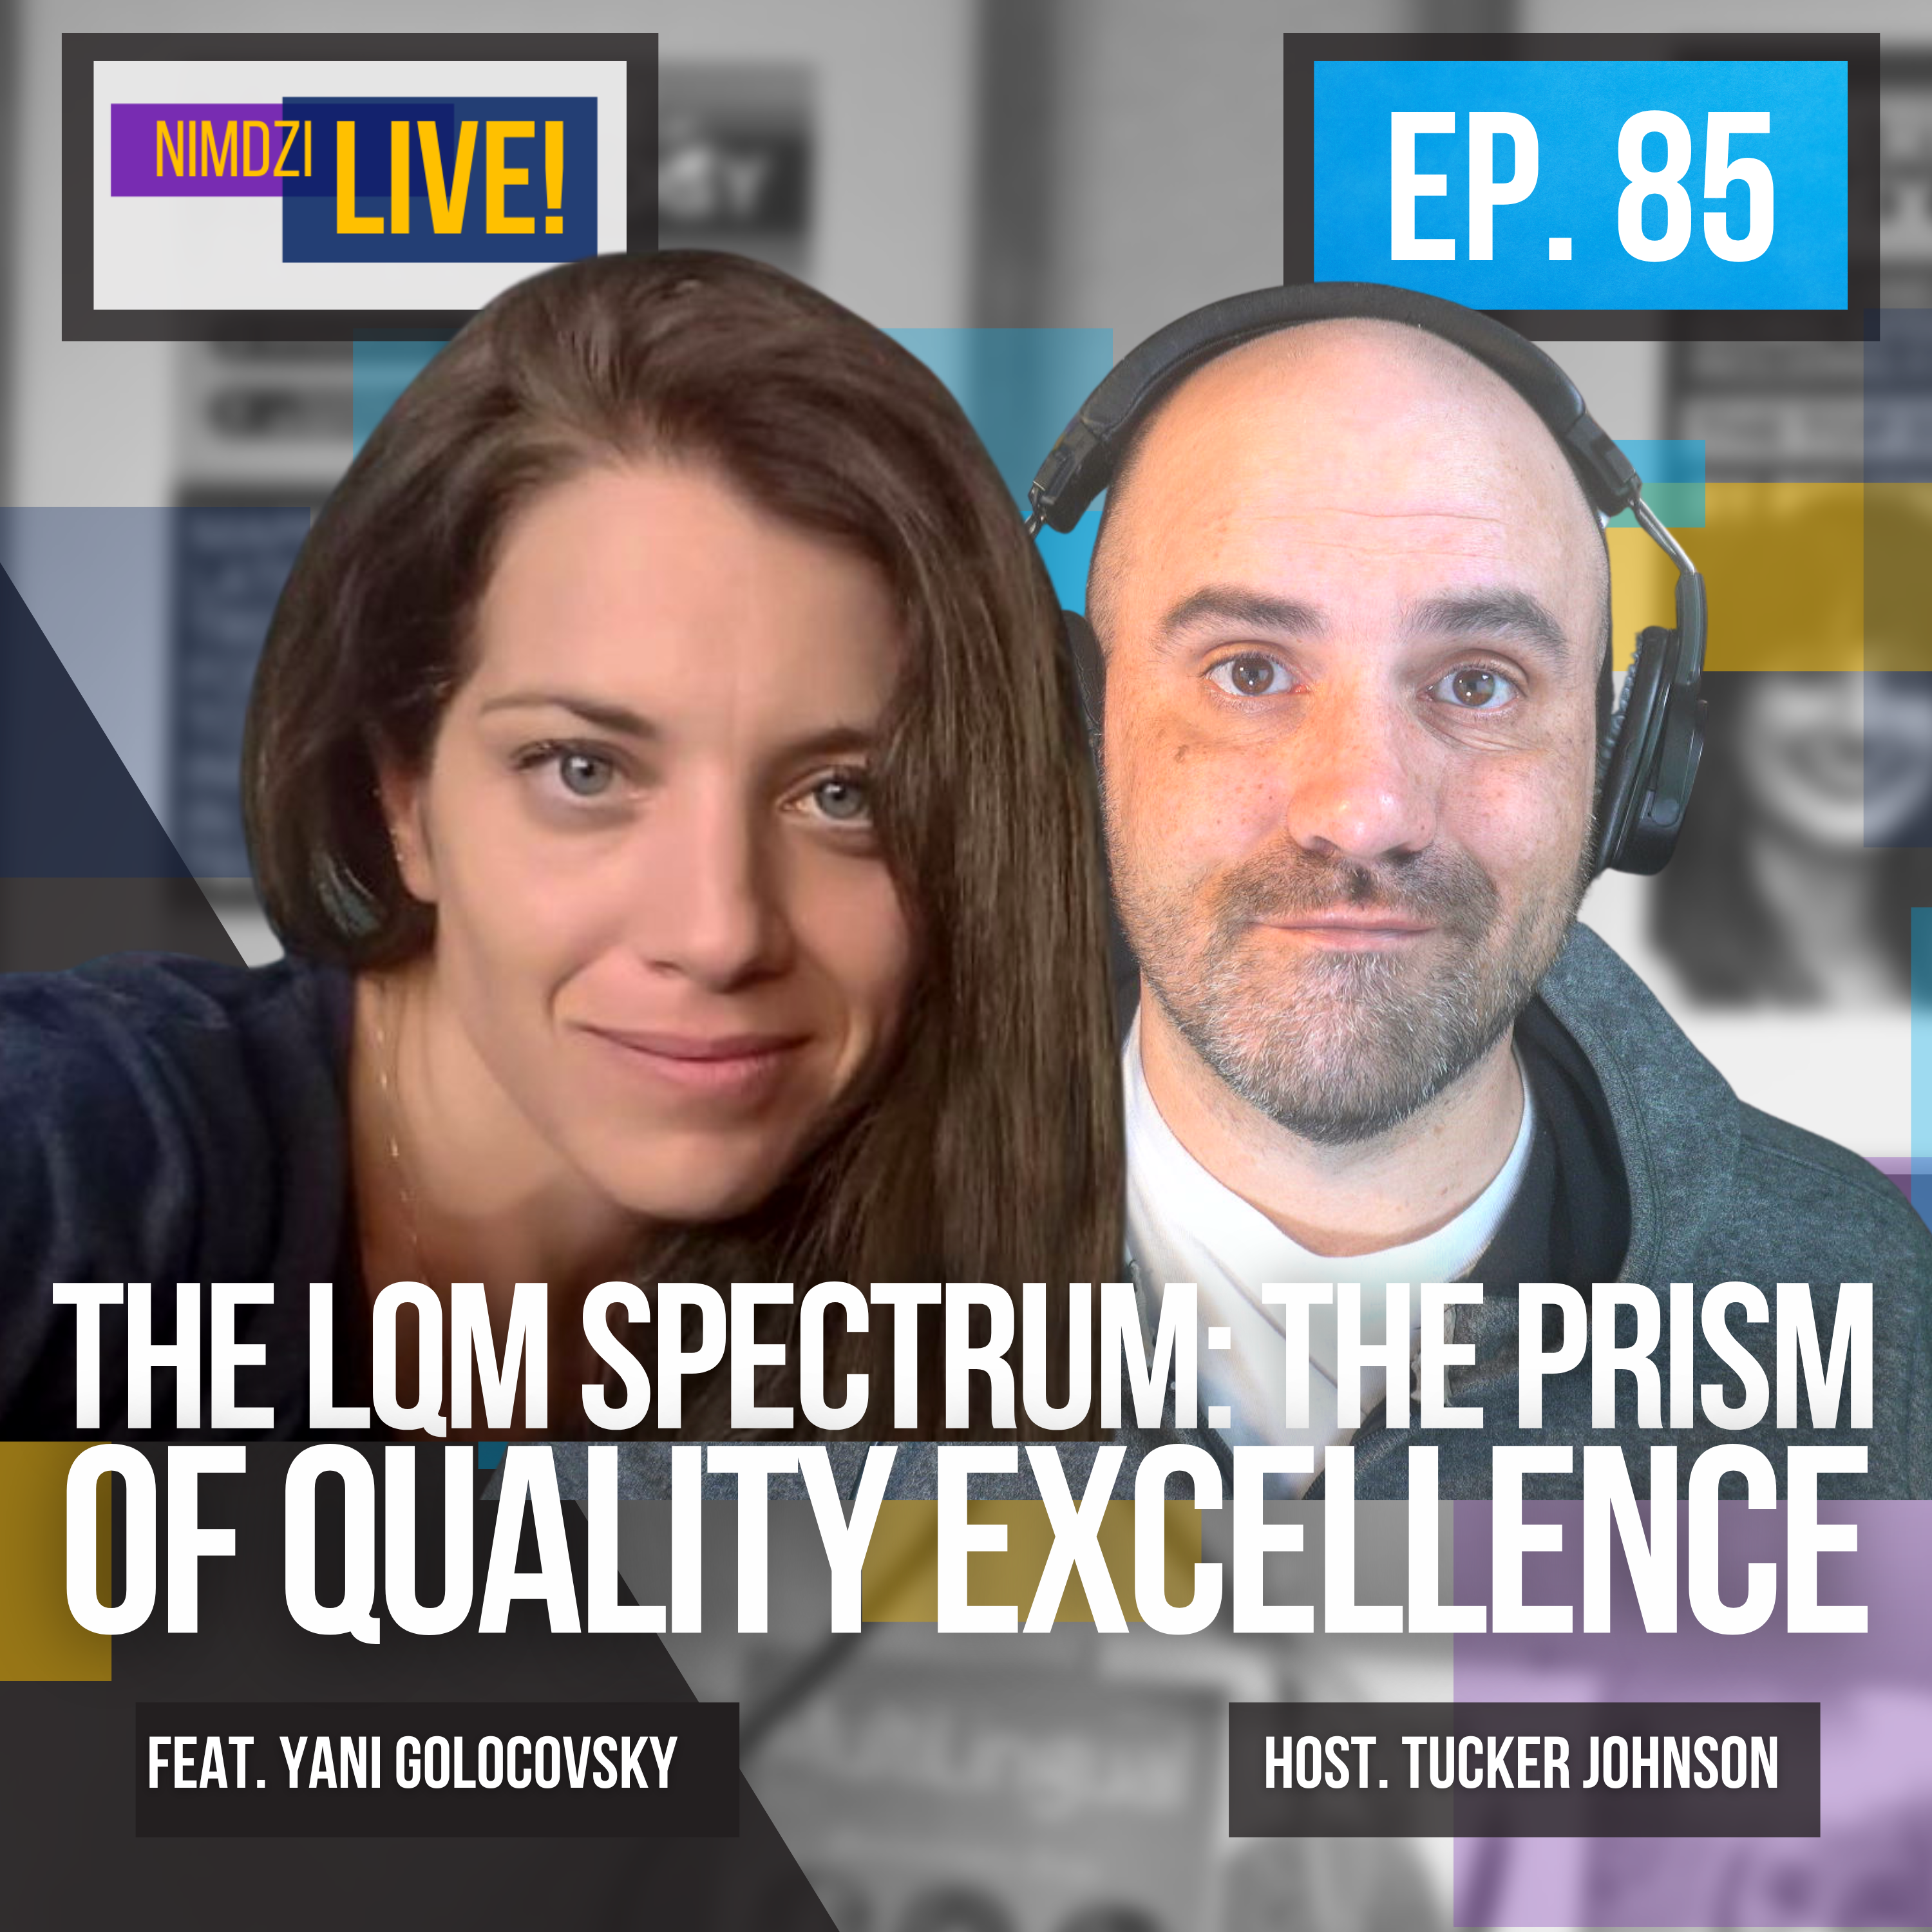 The LQM Spectrum: The prism of quality excellence feat. Yani Golocovsky